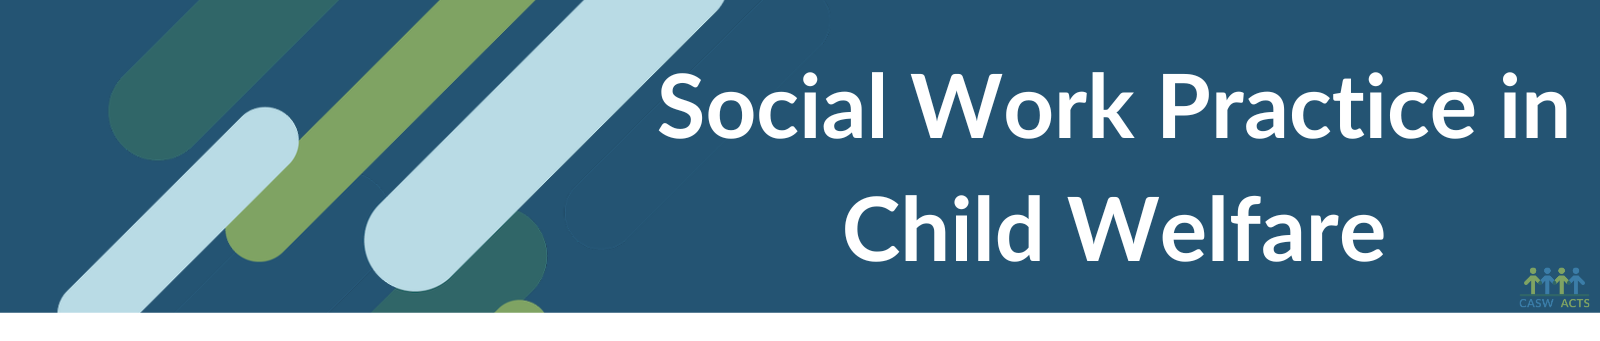 Social Work Practice in Child Welfare | Canadian Association of Social ...